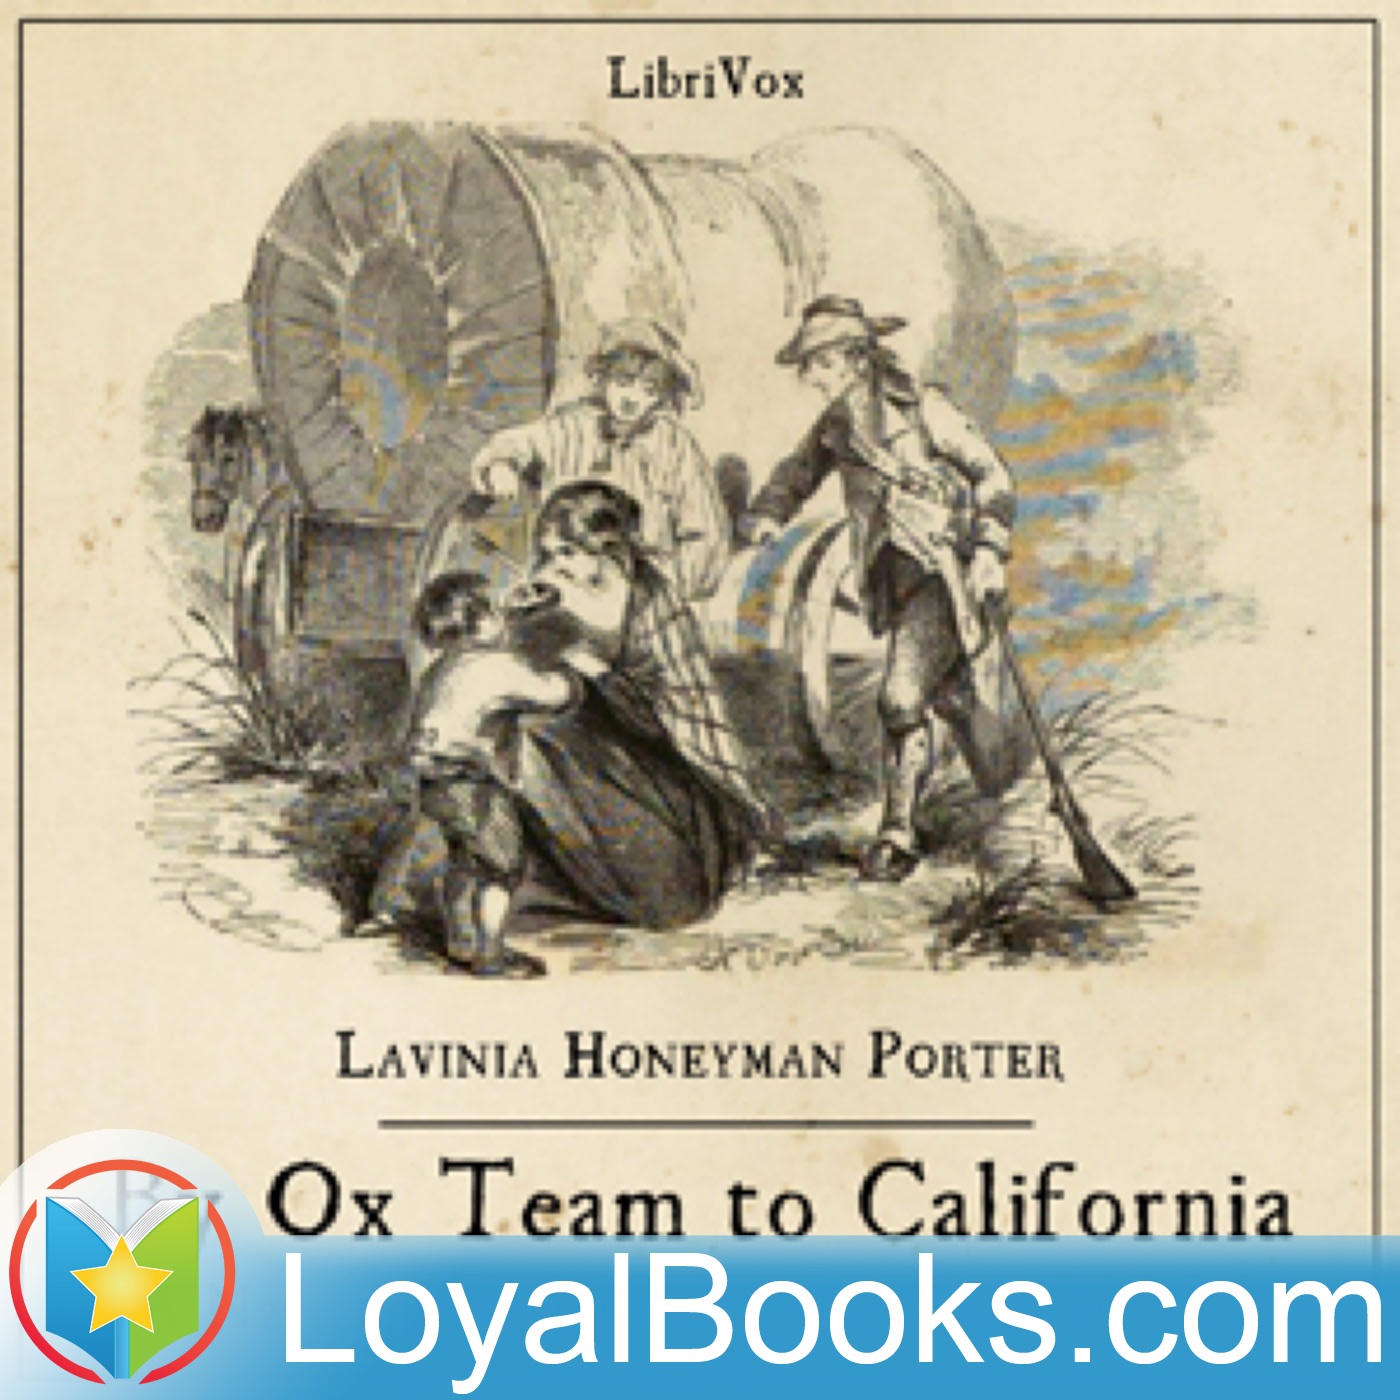 By Ox Team to California - A Narrative of Crossing the Plains in 1860 by Lavinia Honeyman Porter